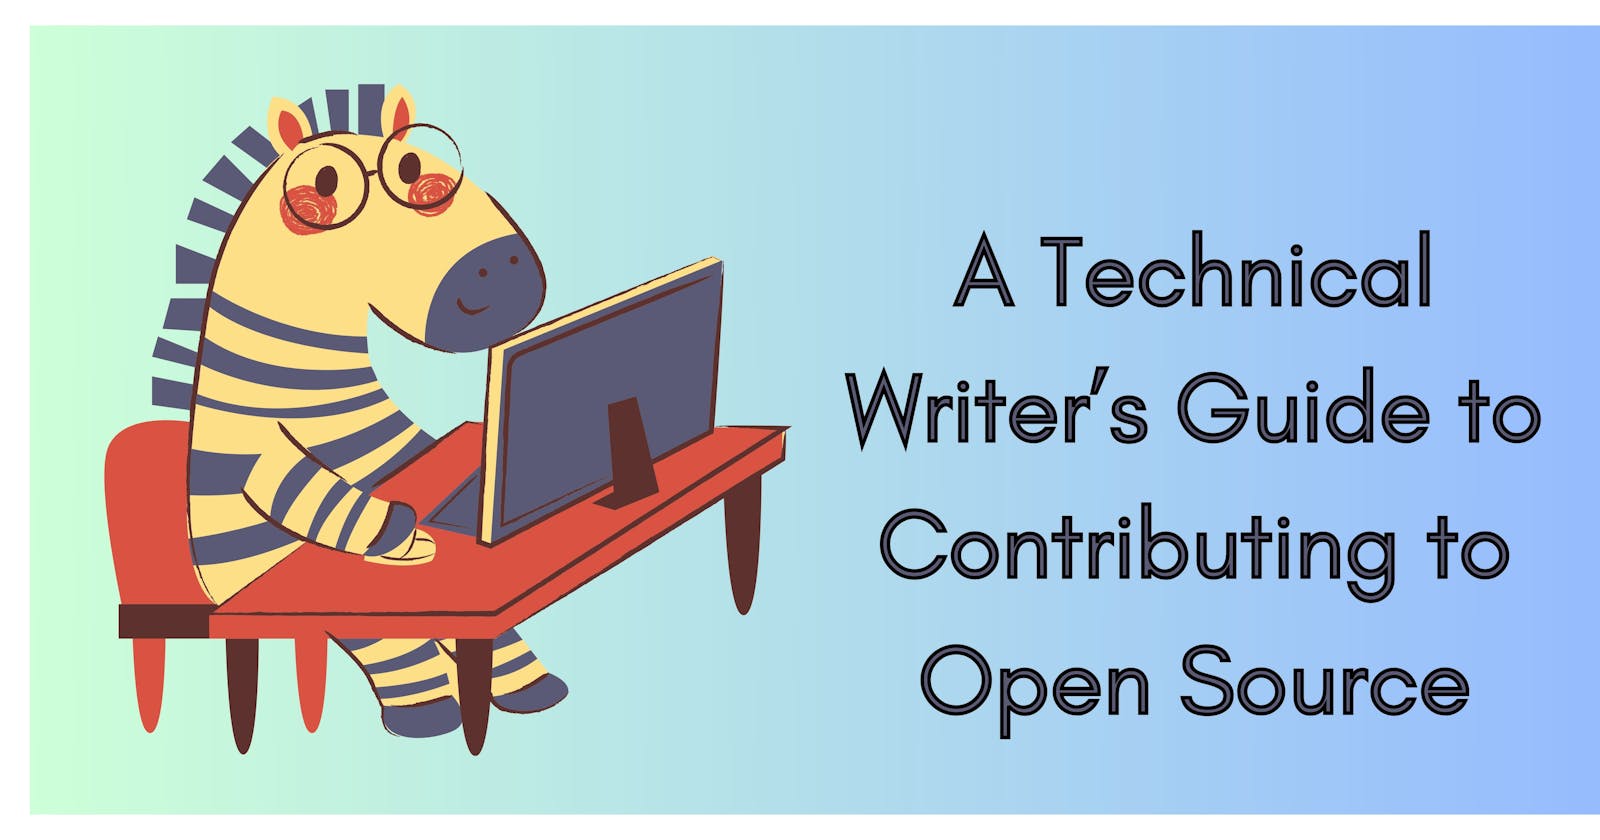 A Technical Writer's Guide To Contributing to Open Source